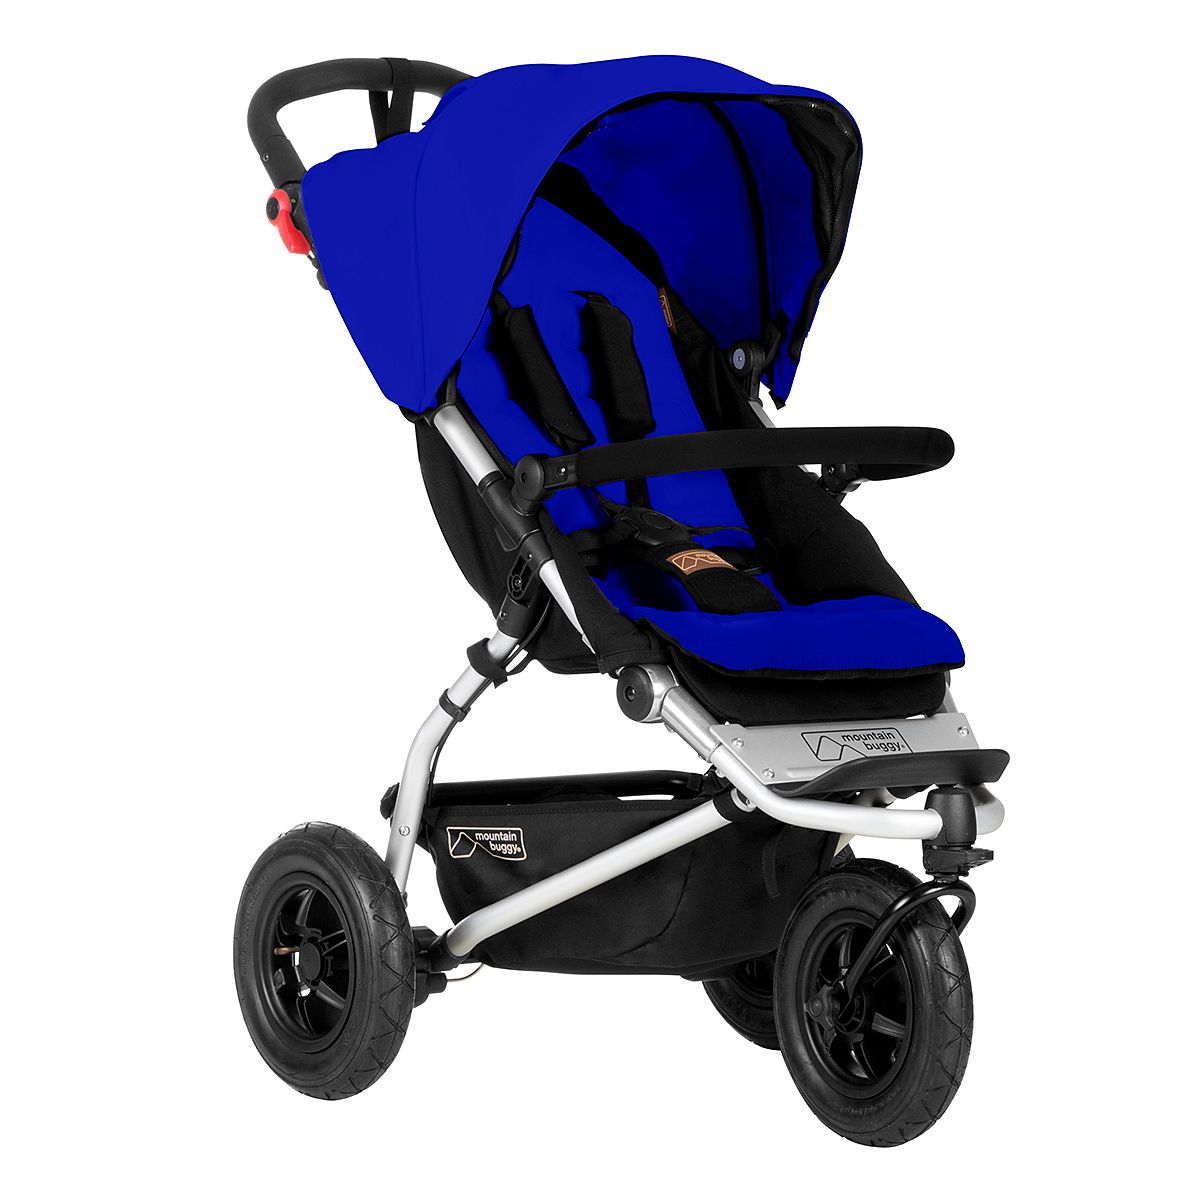 Brand New Free Shipping! Marine Mountain Buggy 2015 Swift 3.0 Stroller 